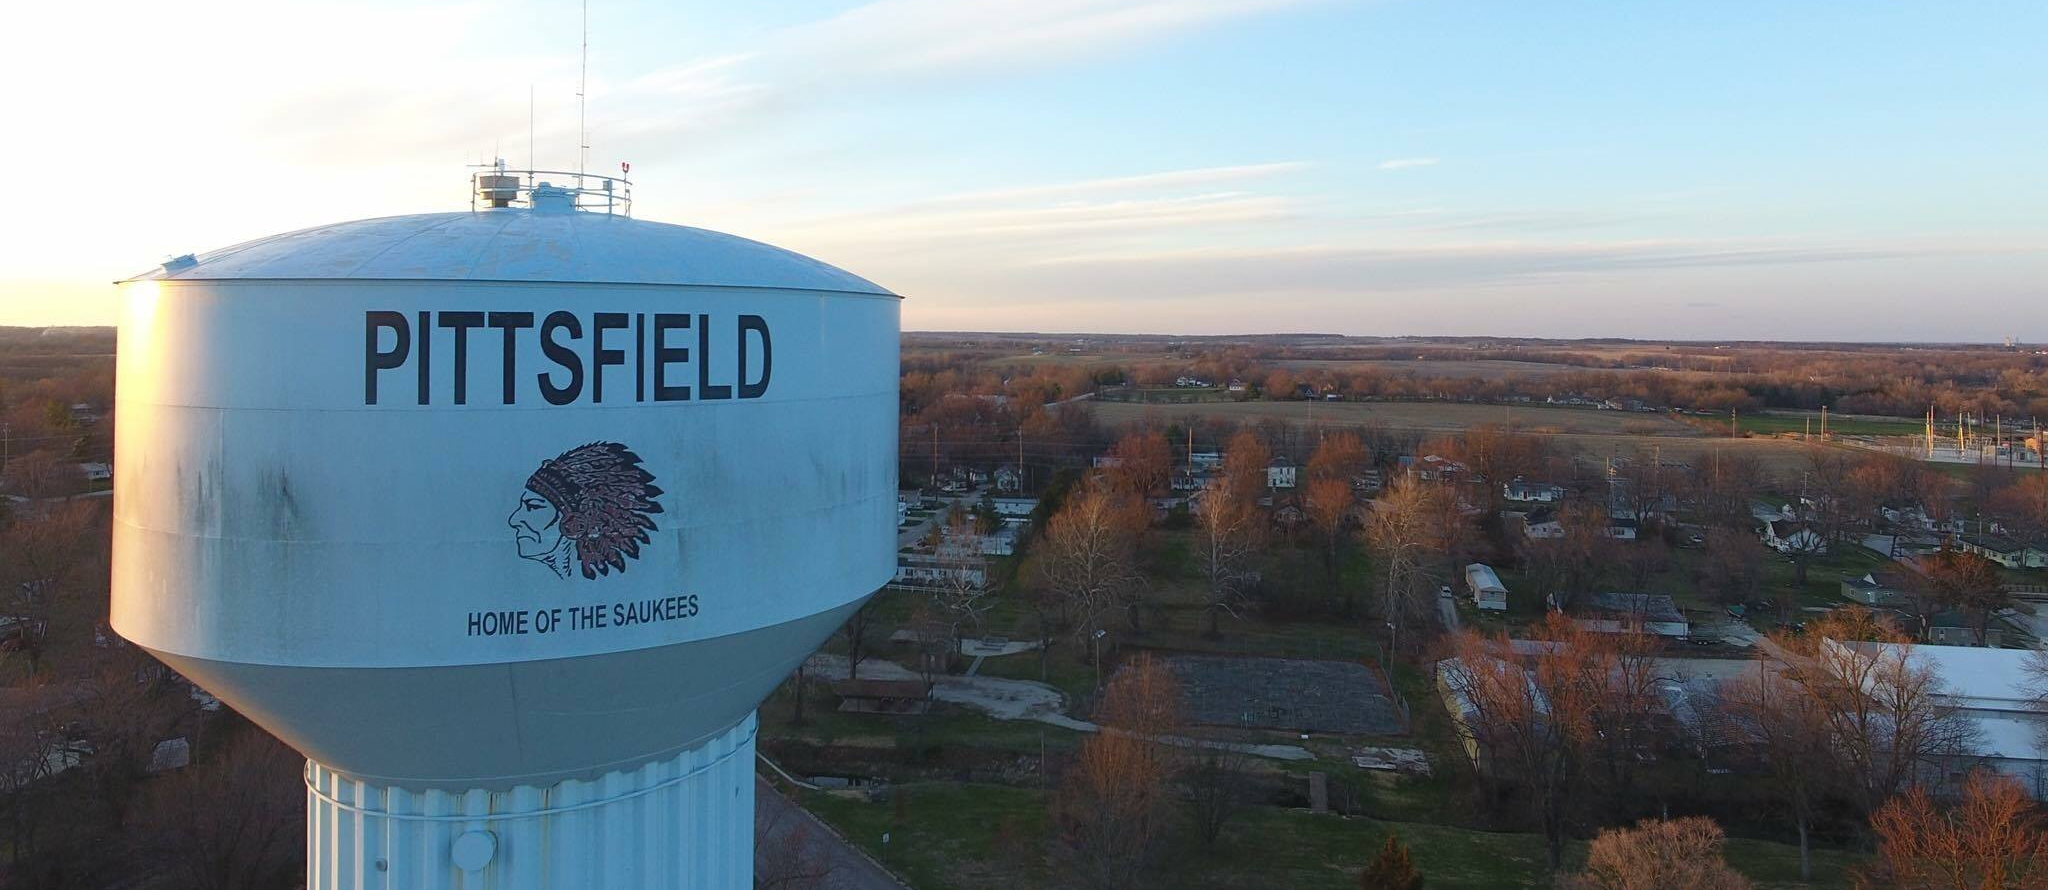 city of pittsfield water tower in foreground of area view of pittsfield